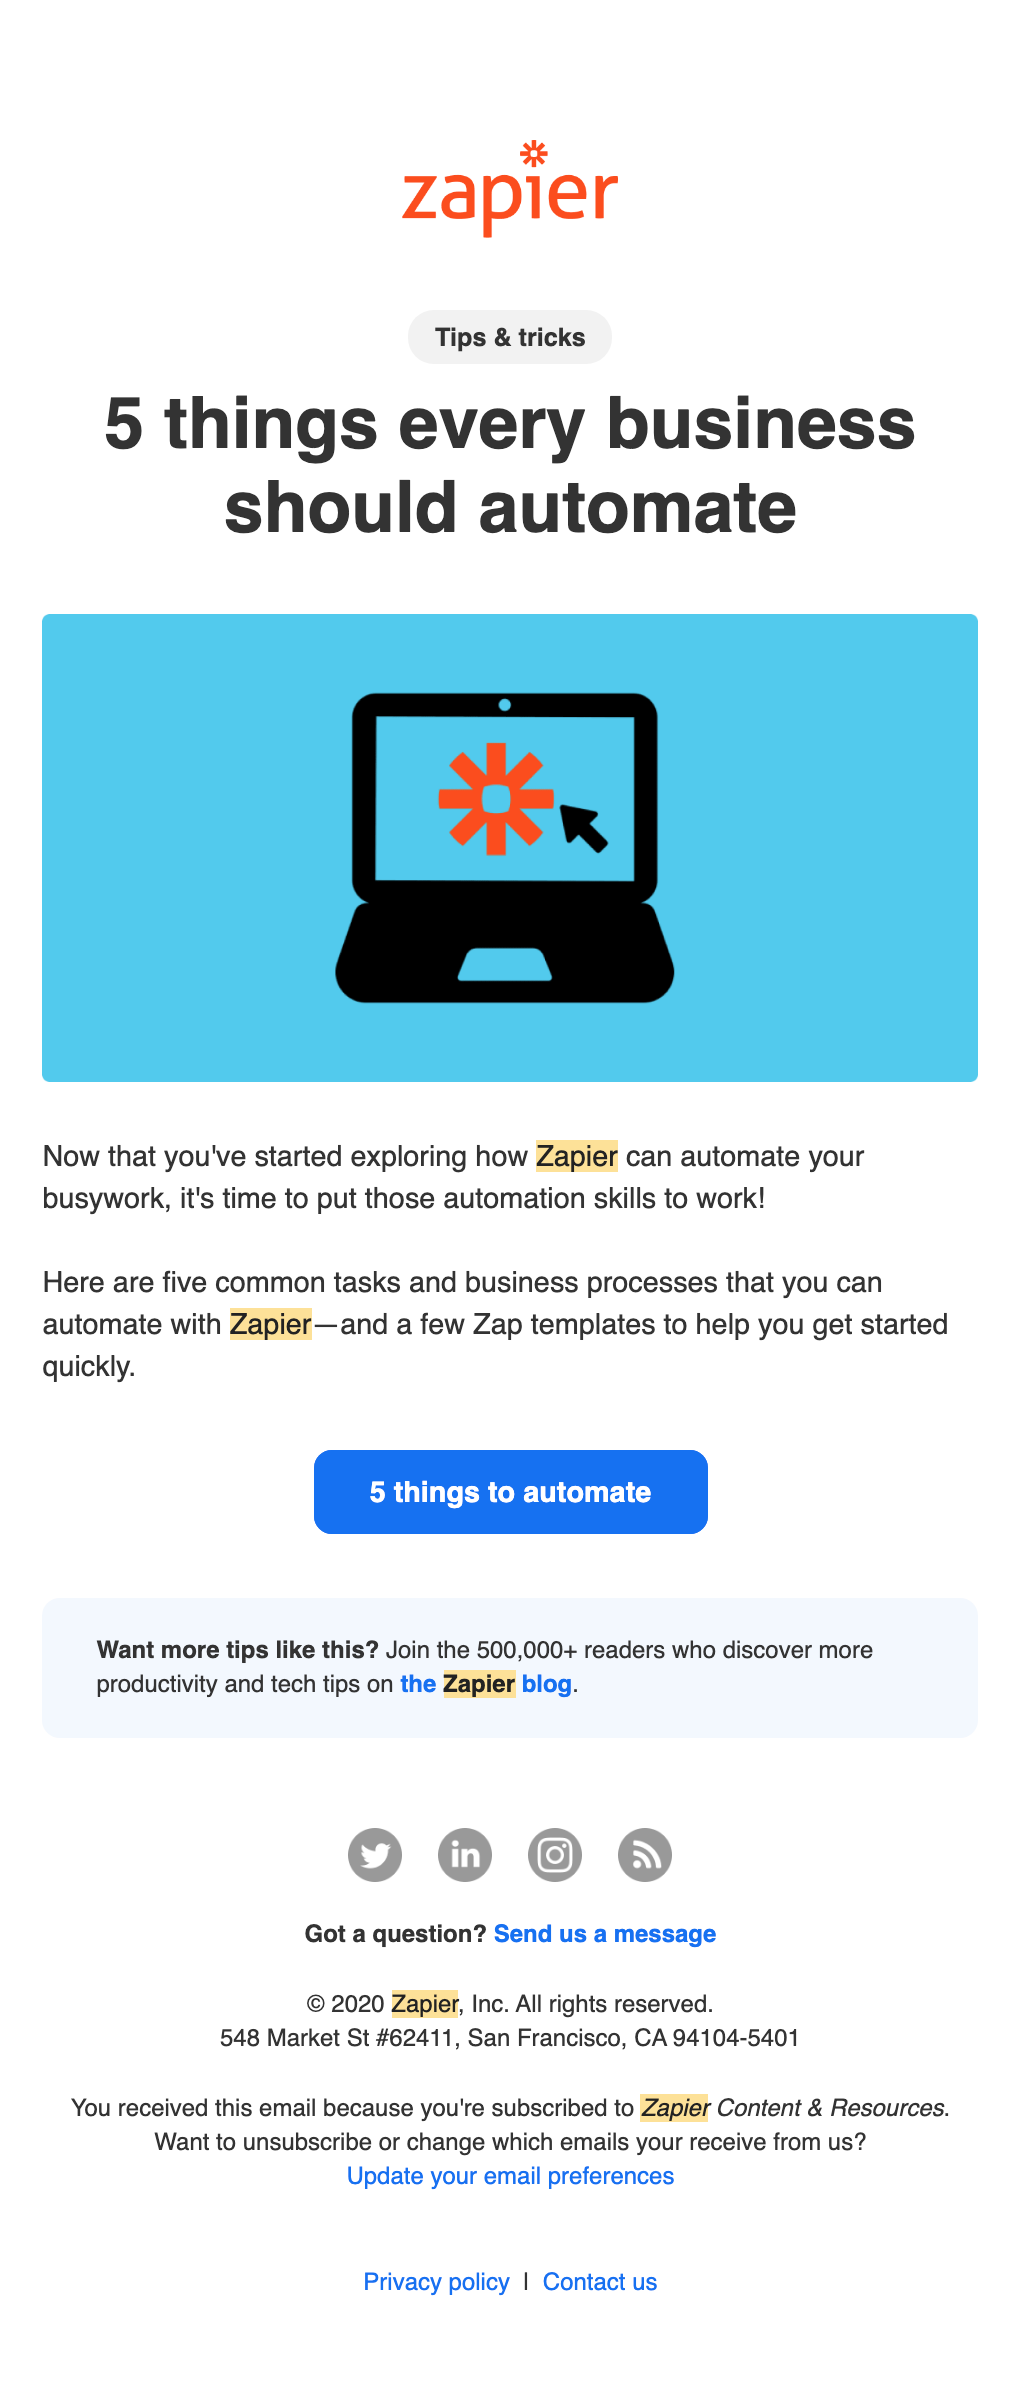 Triggered content email from Zapier upon sign up